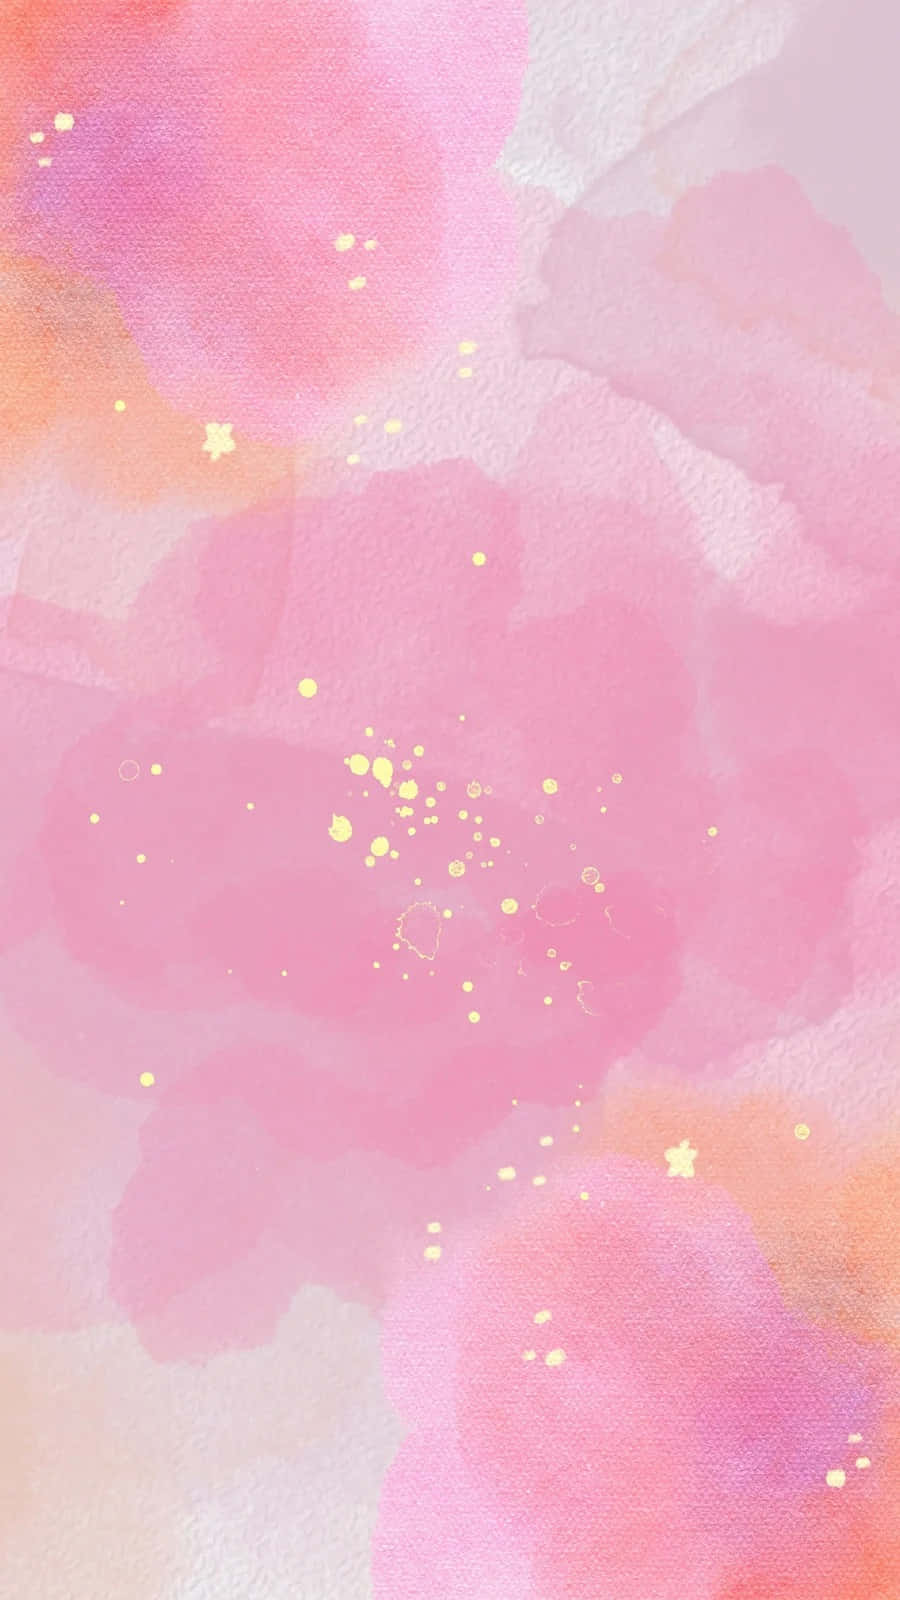 Brighten Up Your Phone with a Pink Background